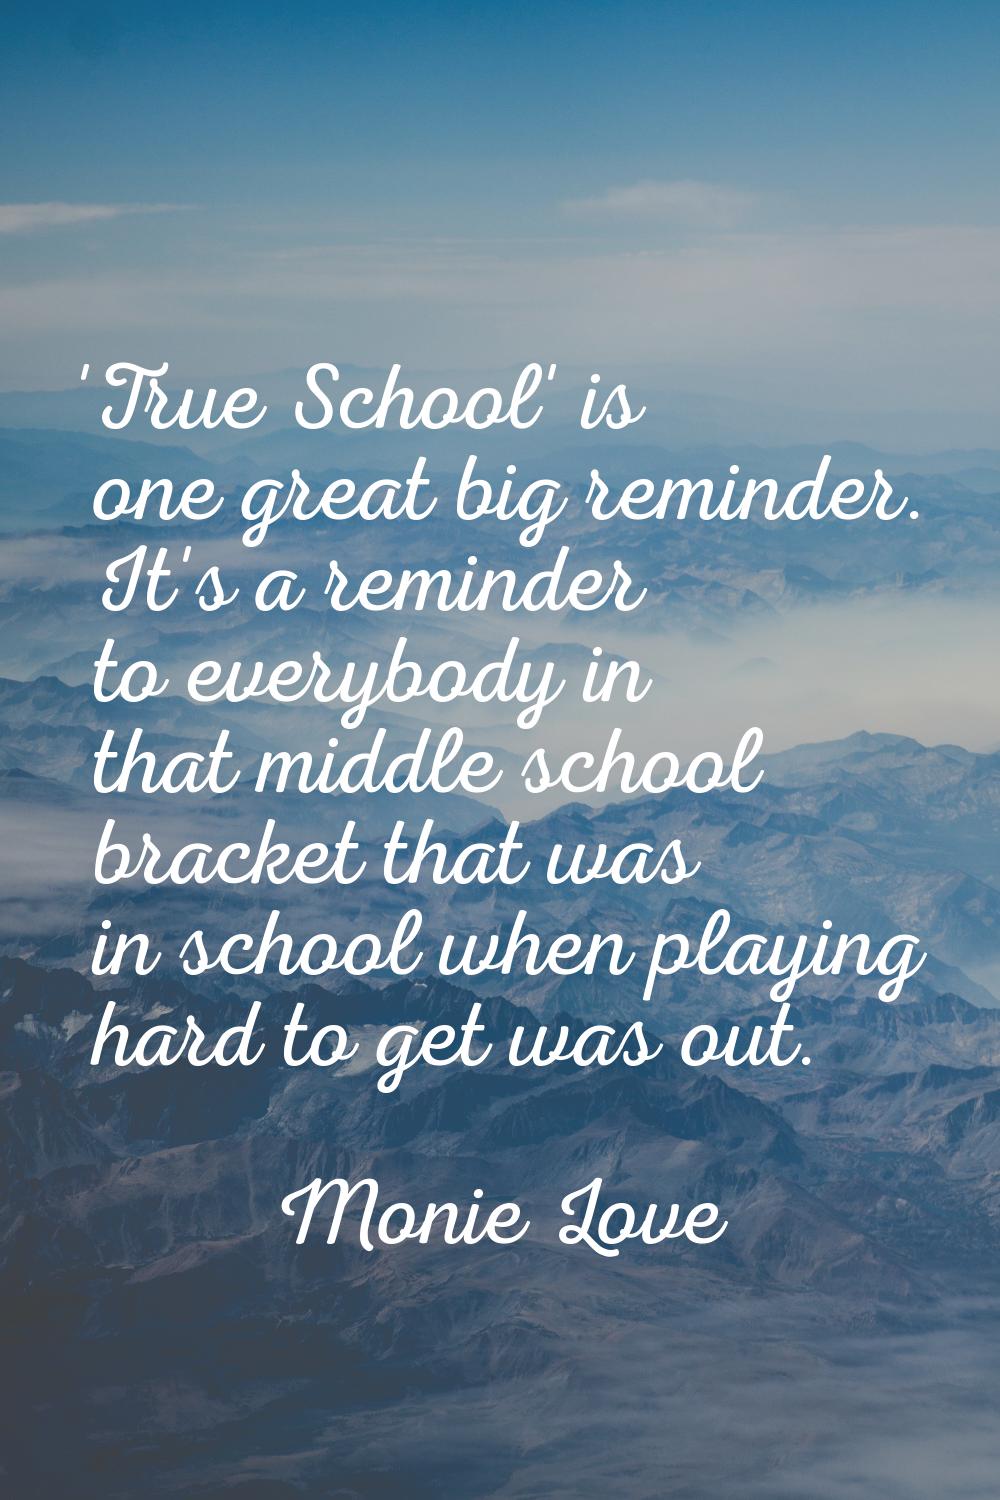 'True School' is one great big reminder. It's a reminder to everybody in that middle school bracket